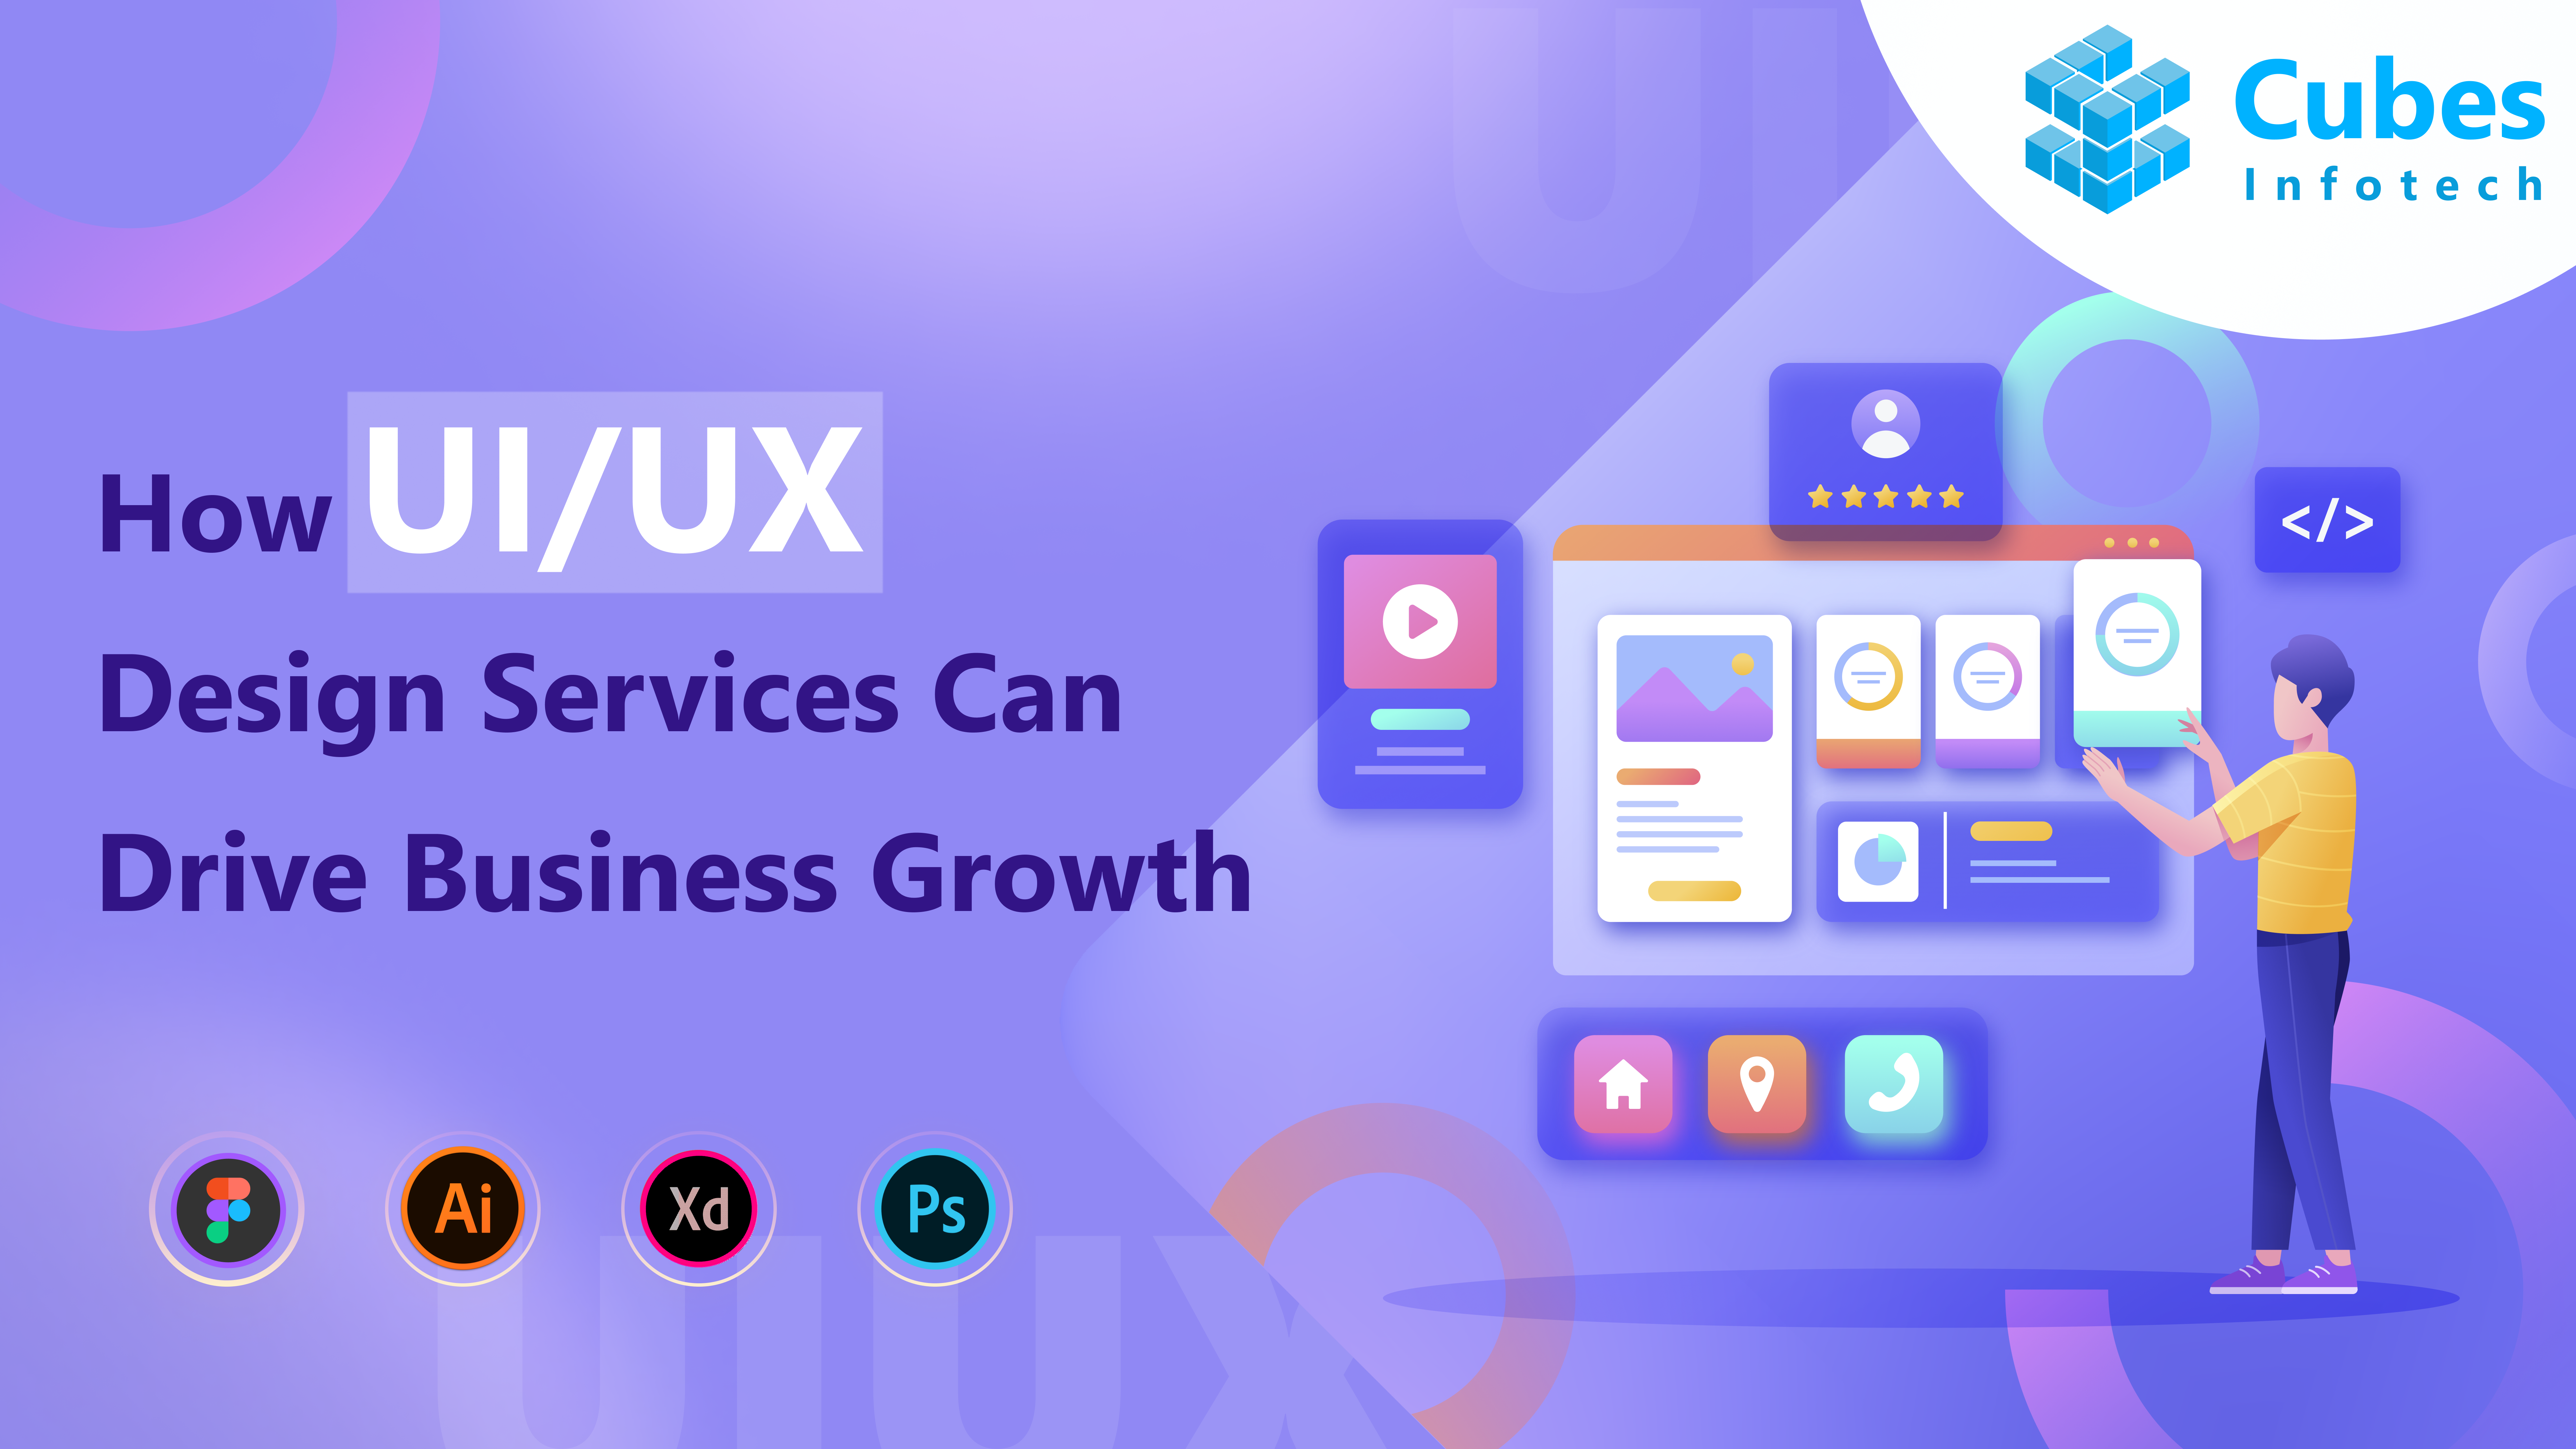 How UI/UX Design Services Can Drive Business Growth